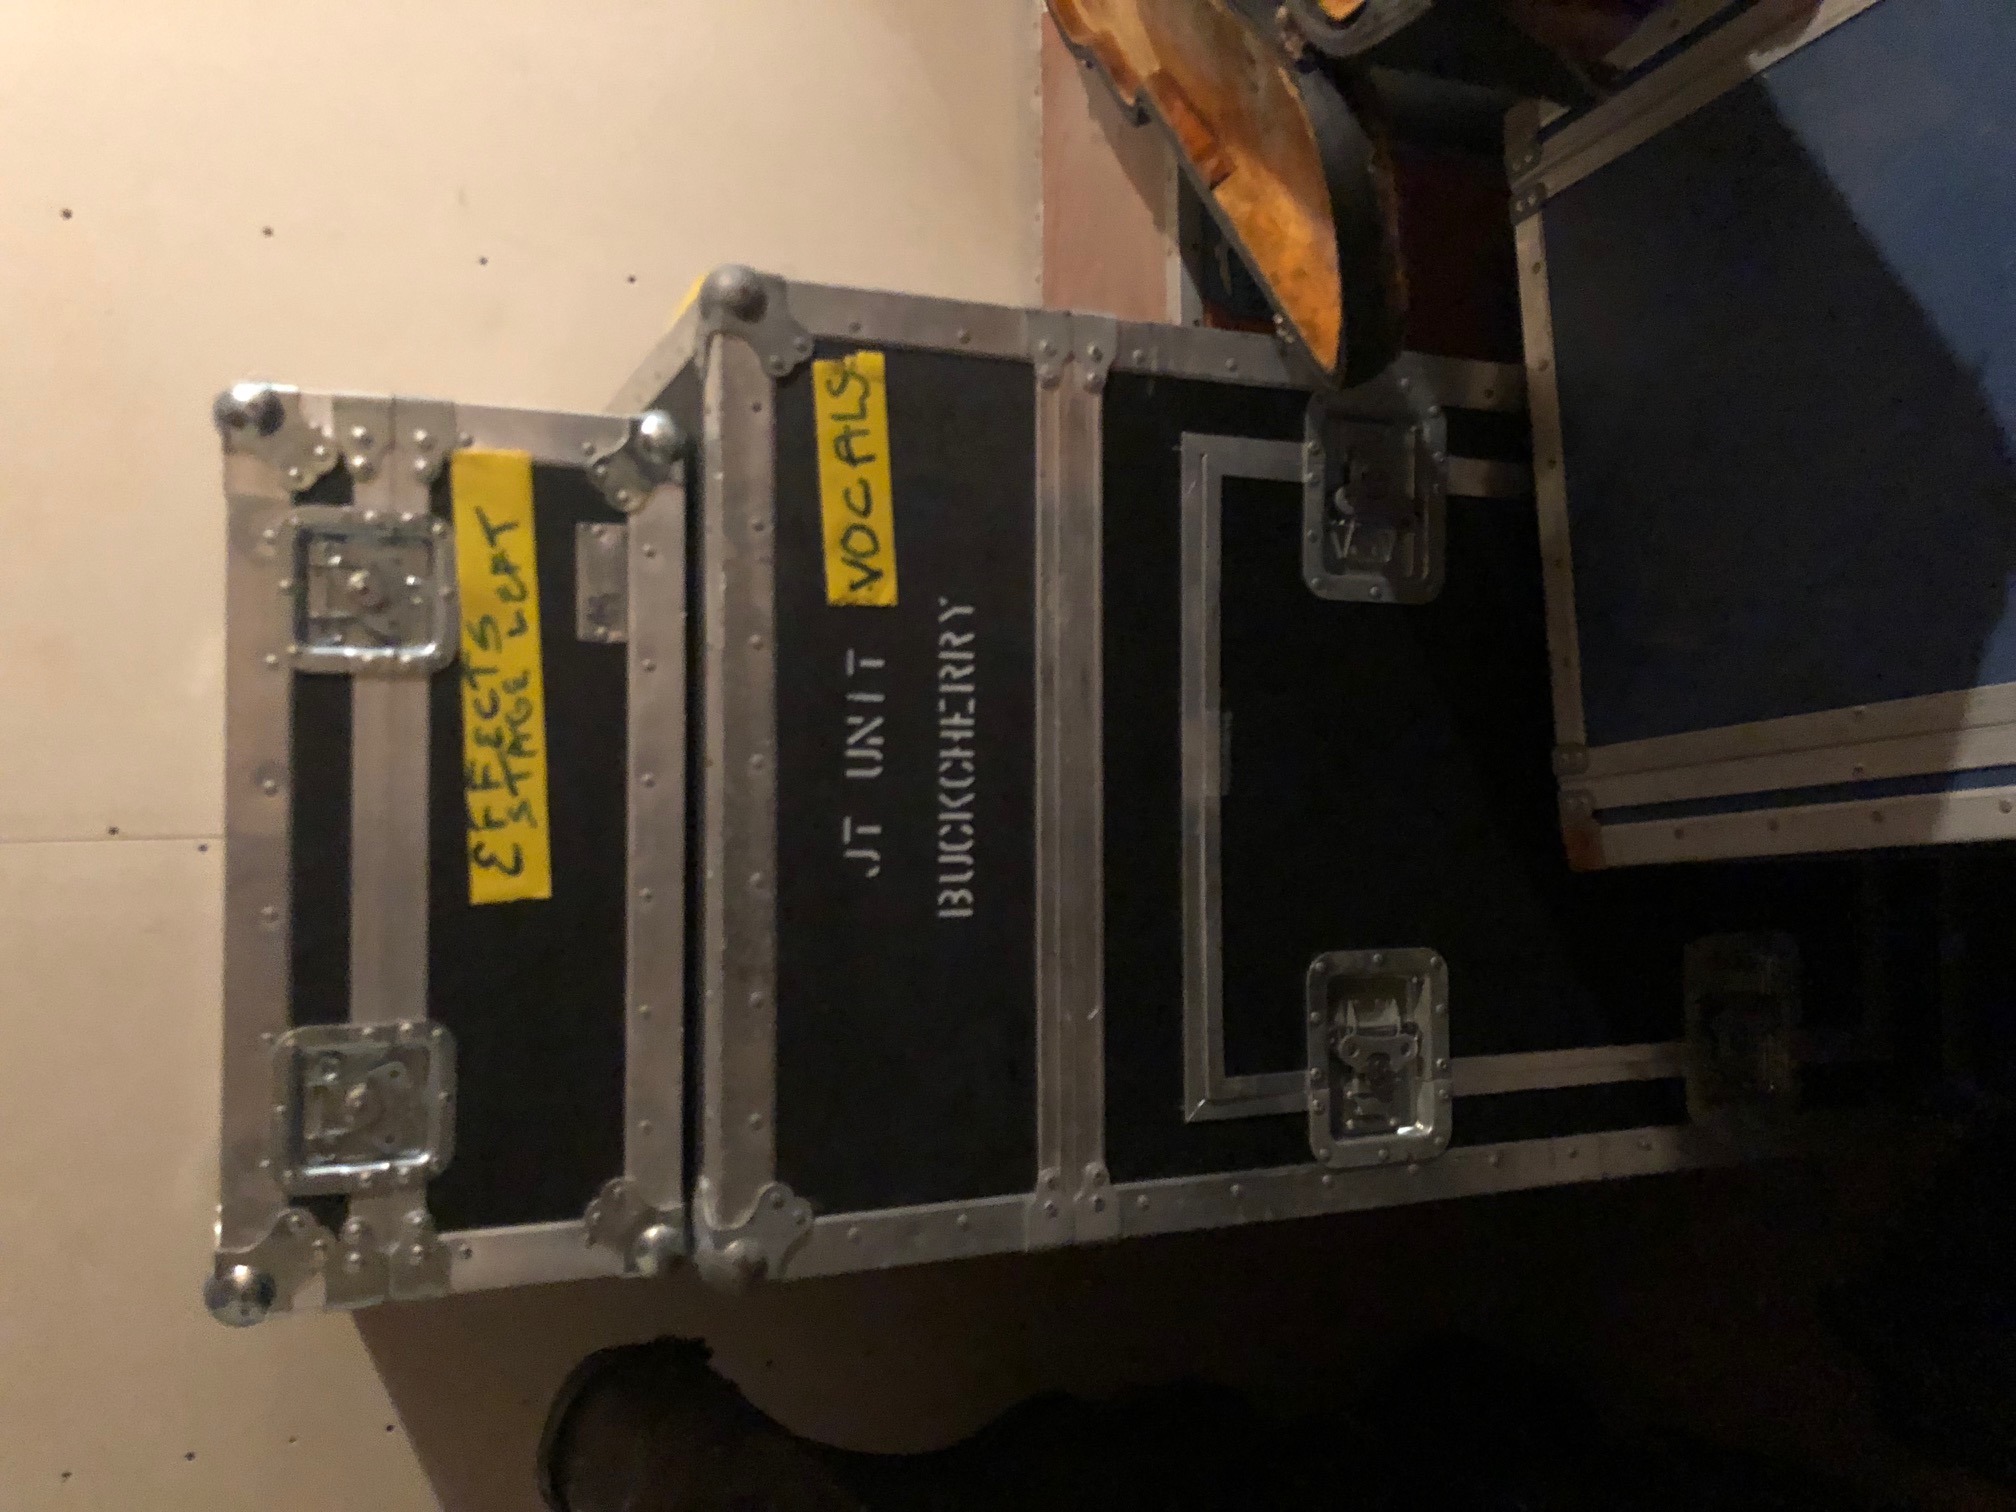 all road cases labeled and empty 